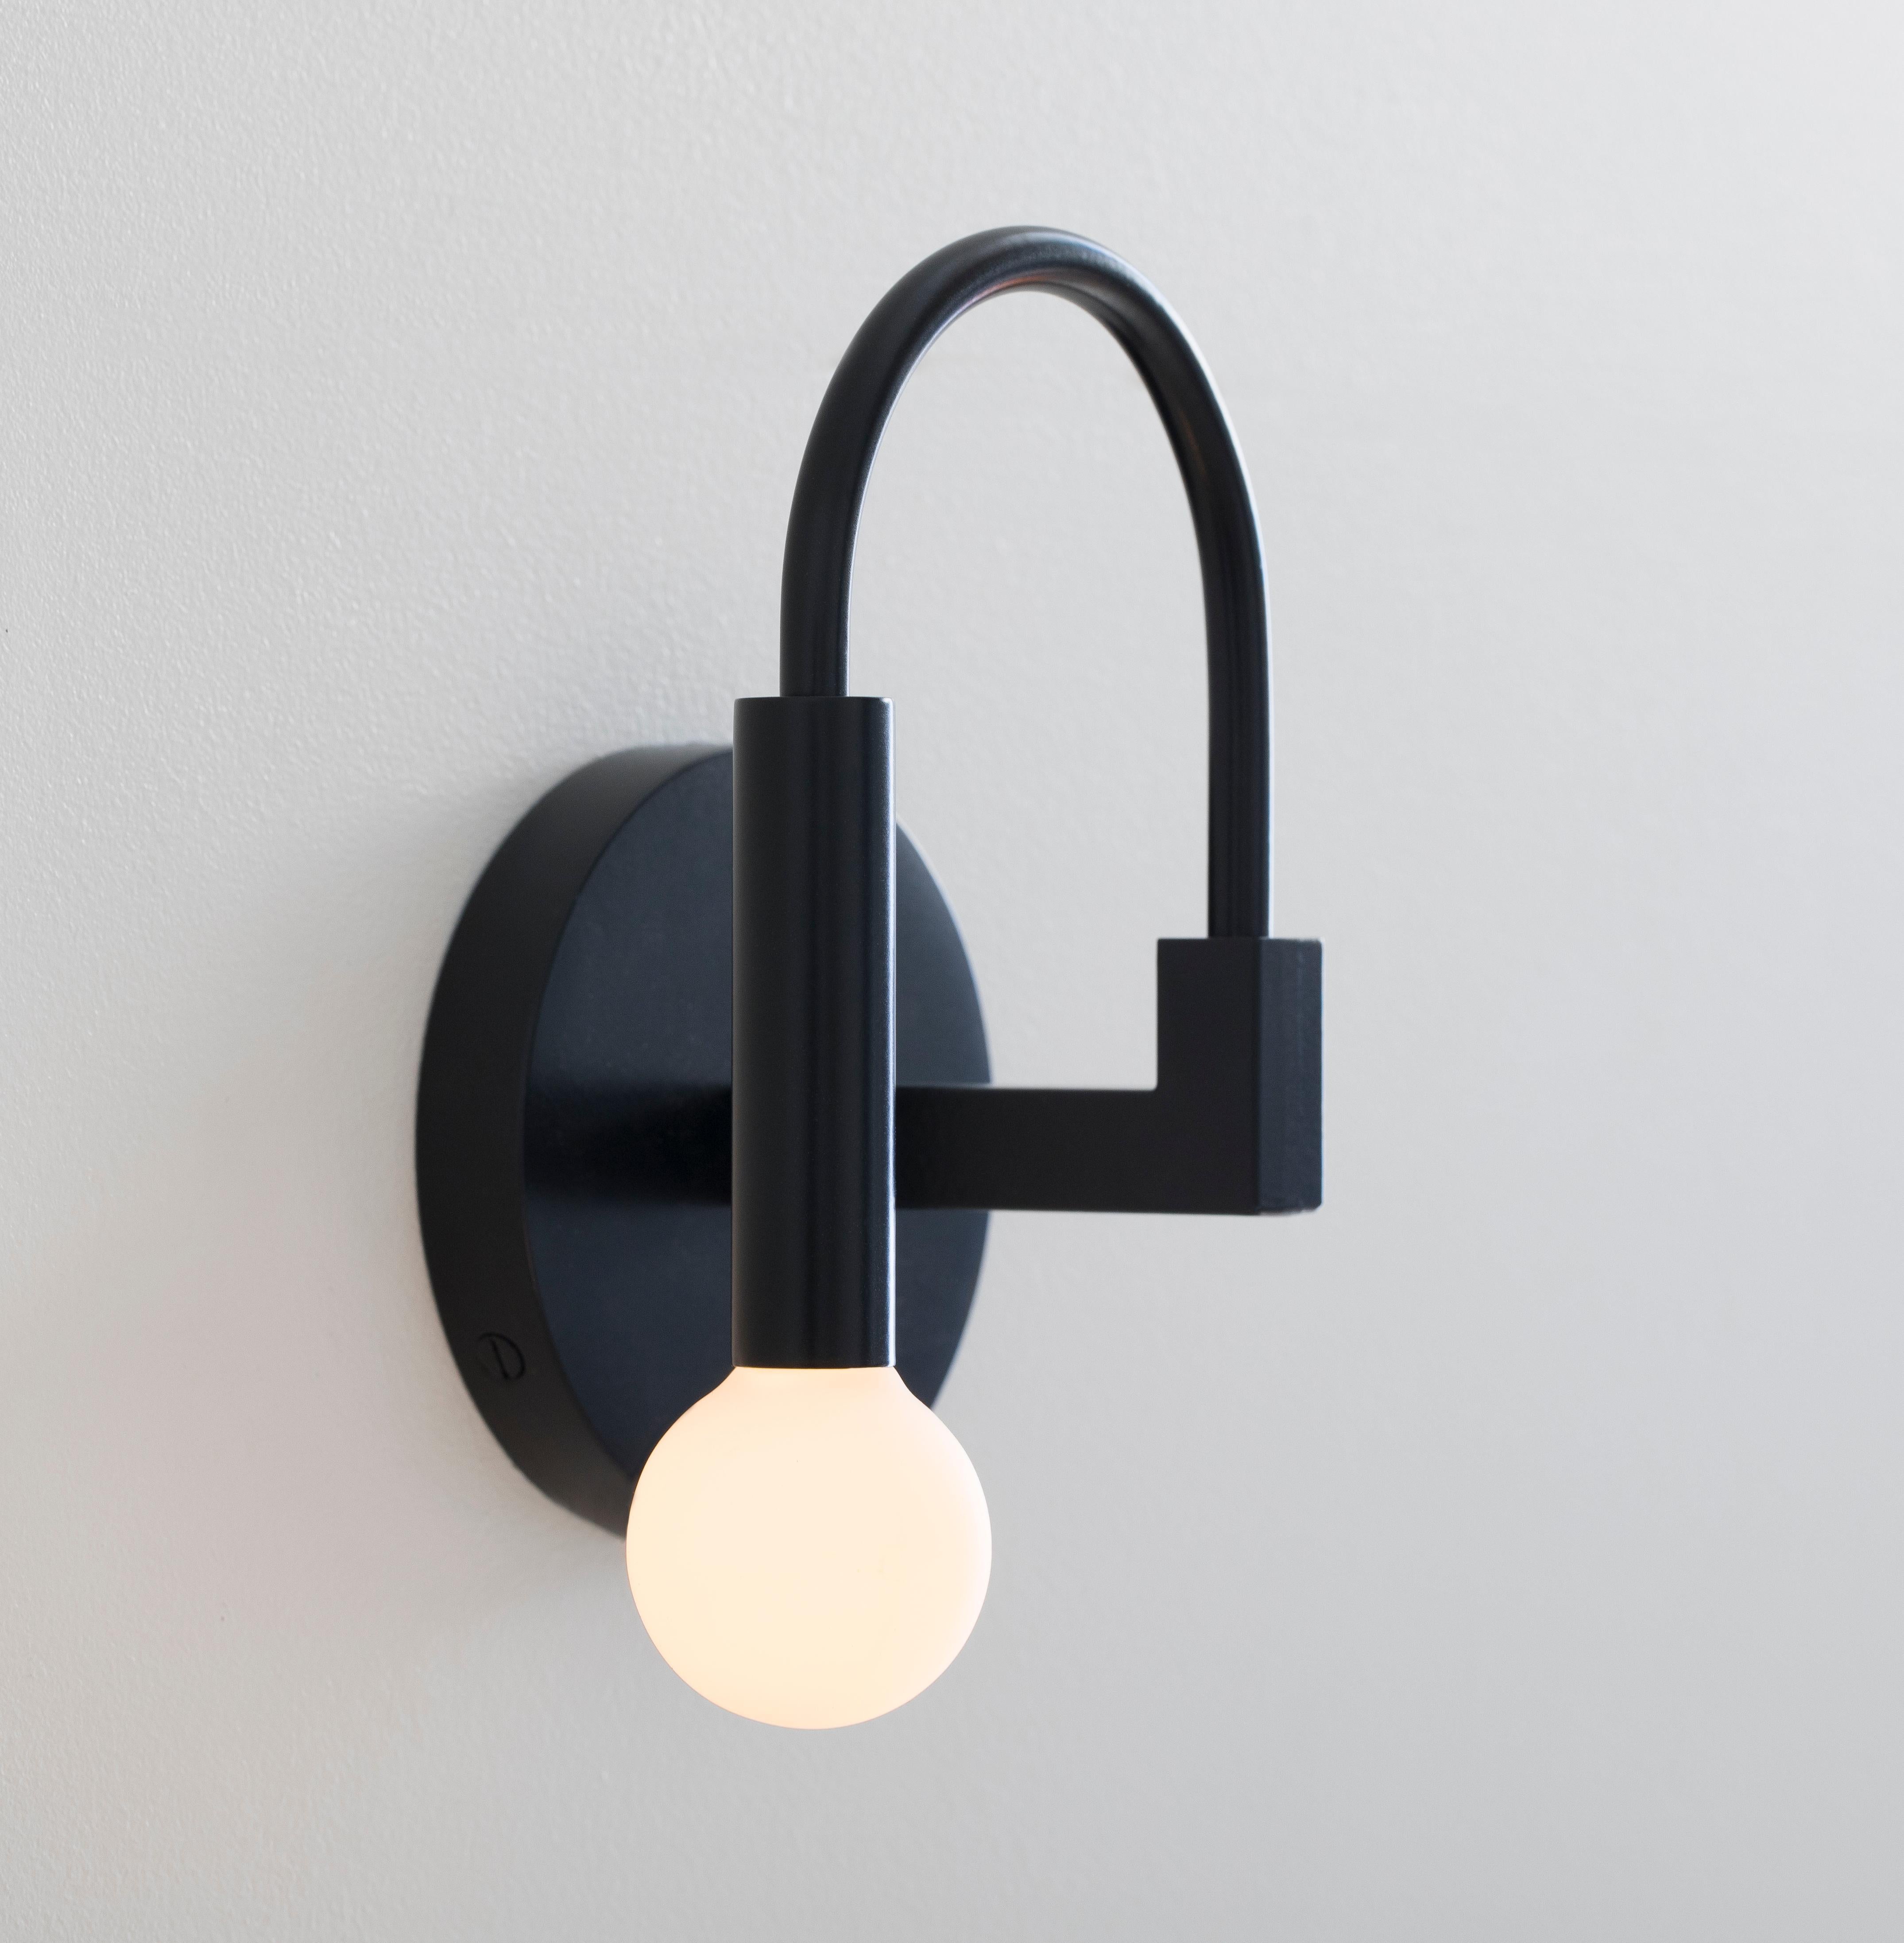 Arch

Arch draws on the elemental forms of Roman architecture to create a playful yet timeless sconce, blurring the line between traditional and contemporary design.

Details:
This listing is for one arch wall sconce in matte black with satin